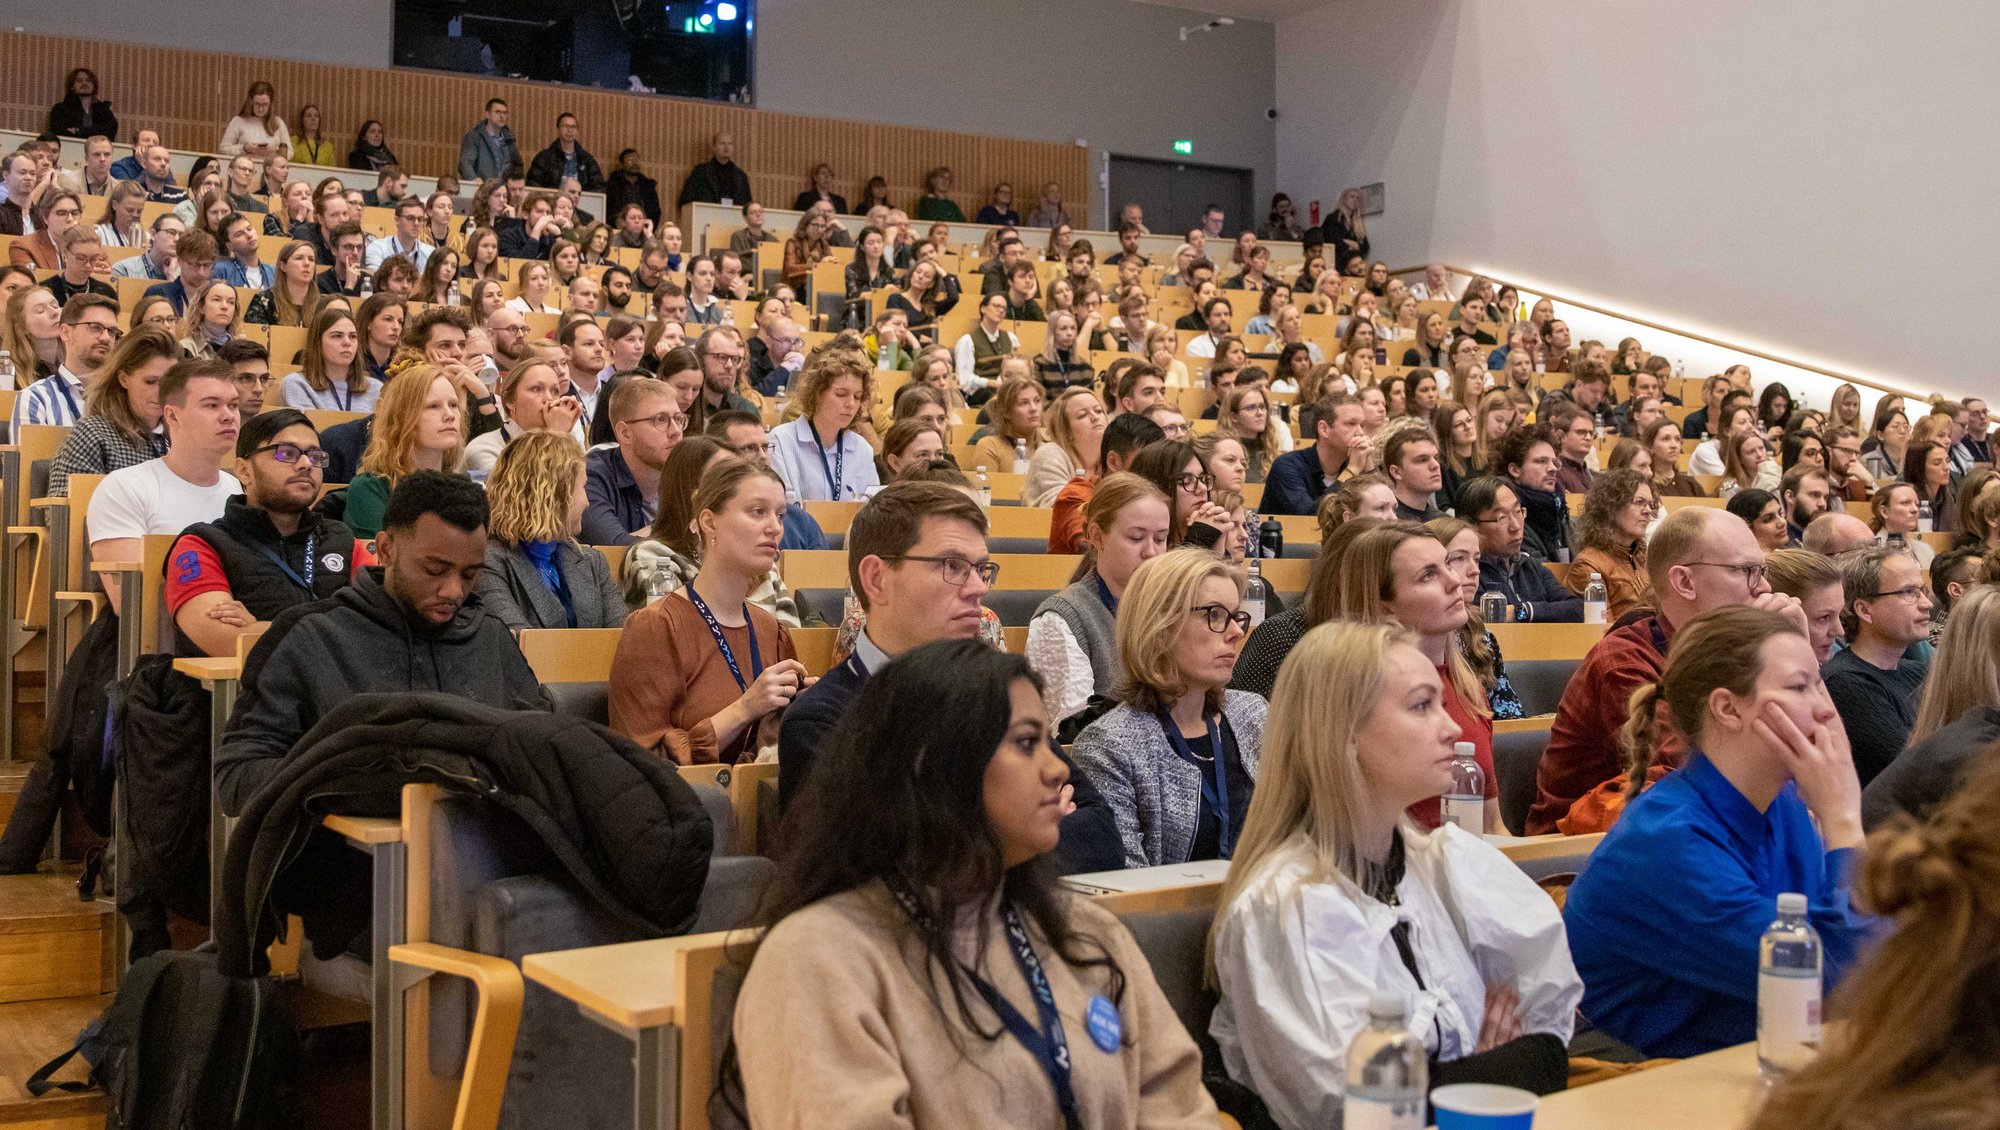 Several hundreds of PhD Students showed up at The Per Kirkeby Auditorium. Photo: Simon Fischel, AU Health.